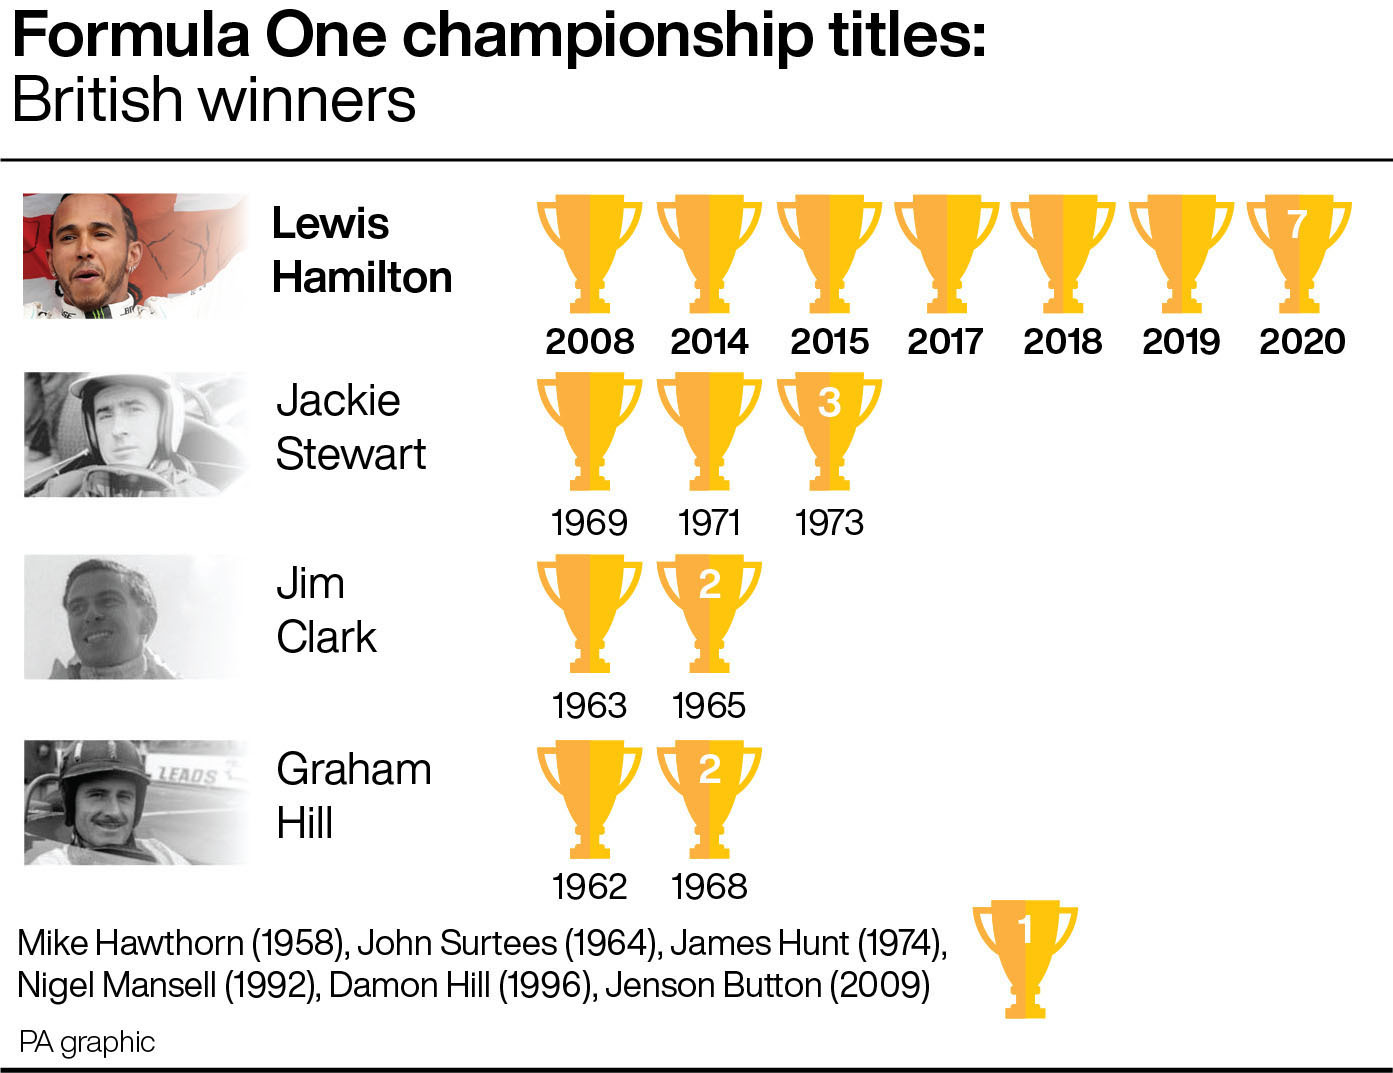 A graphic of British F1 title winners